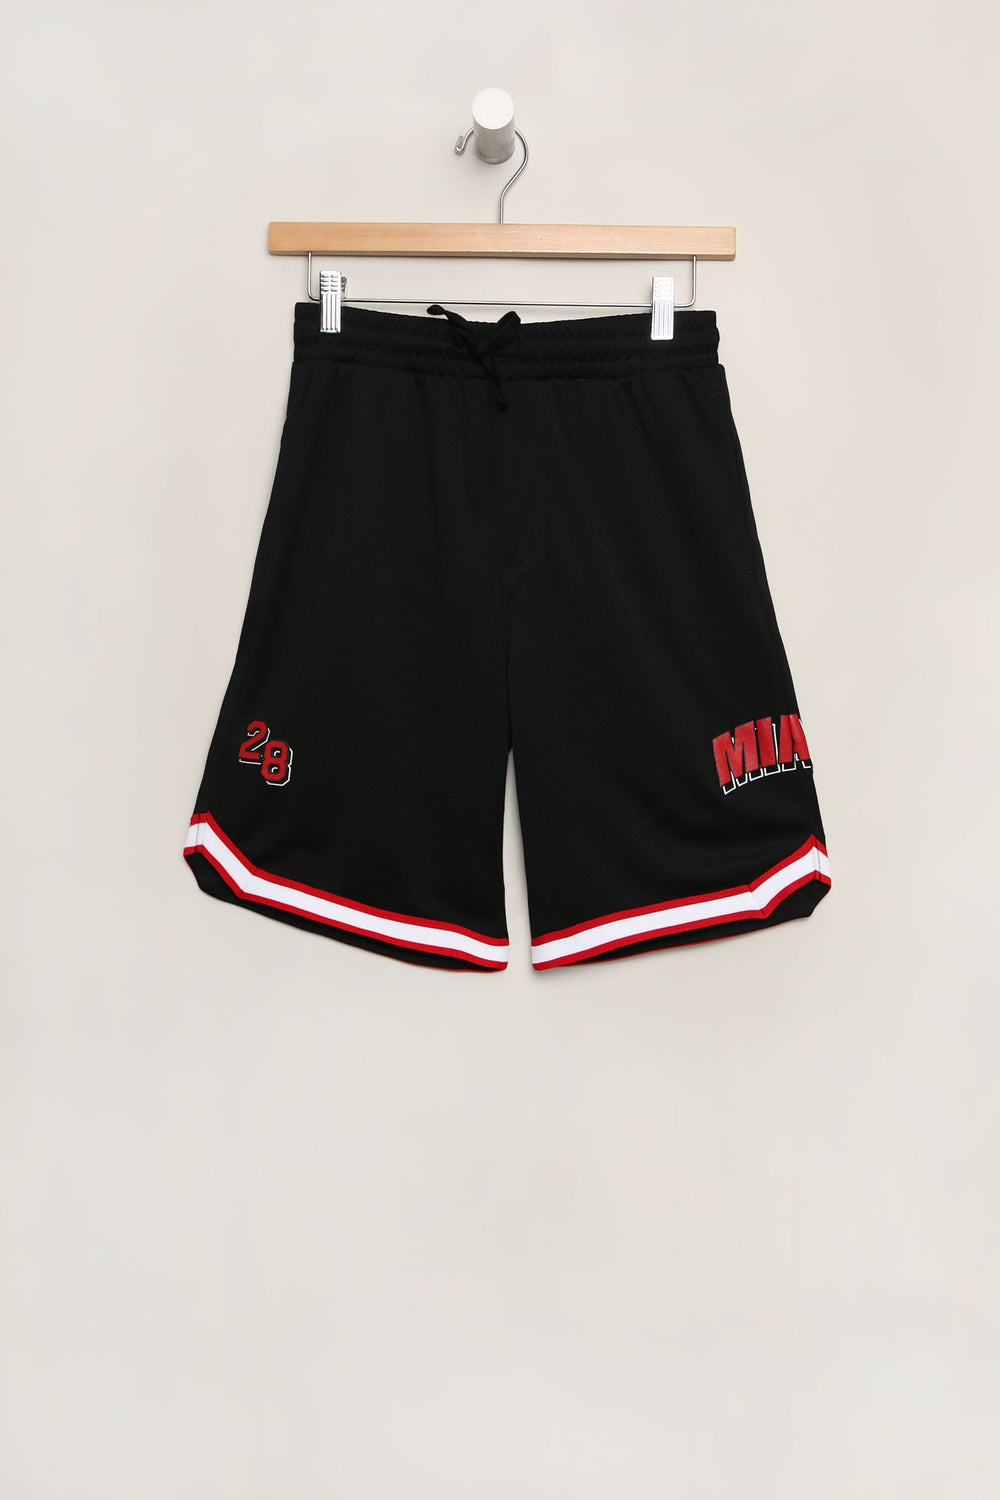 West49 Youth Miami Mesh Shorts West49 Youth Miami Mesh Shorts